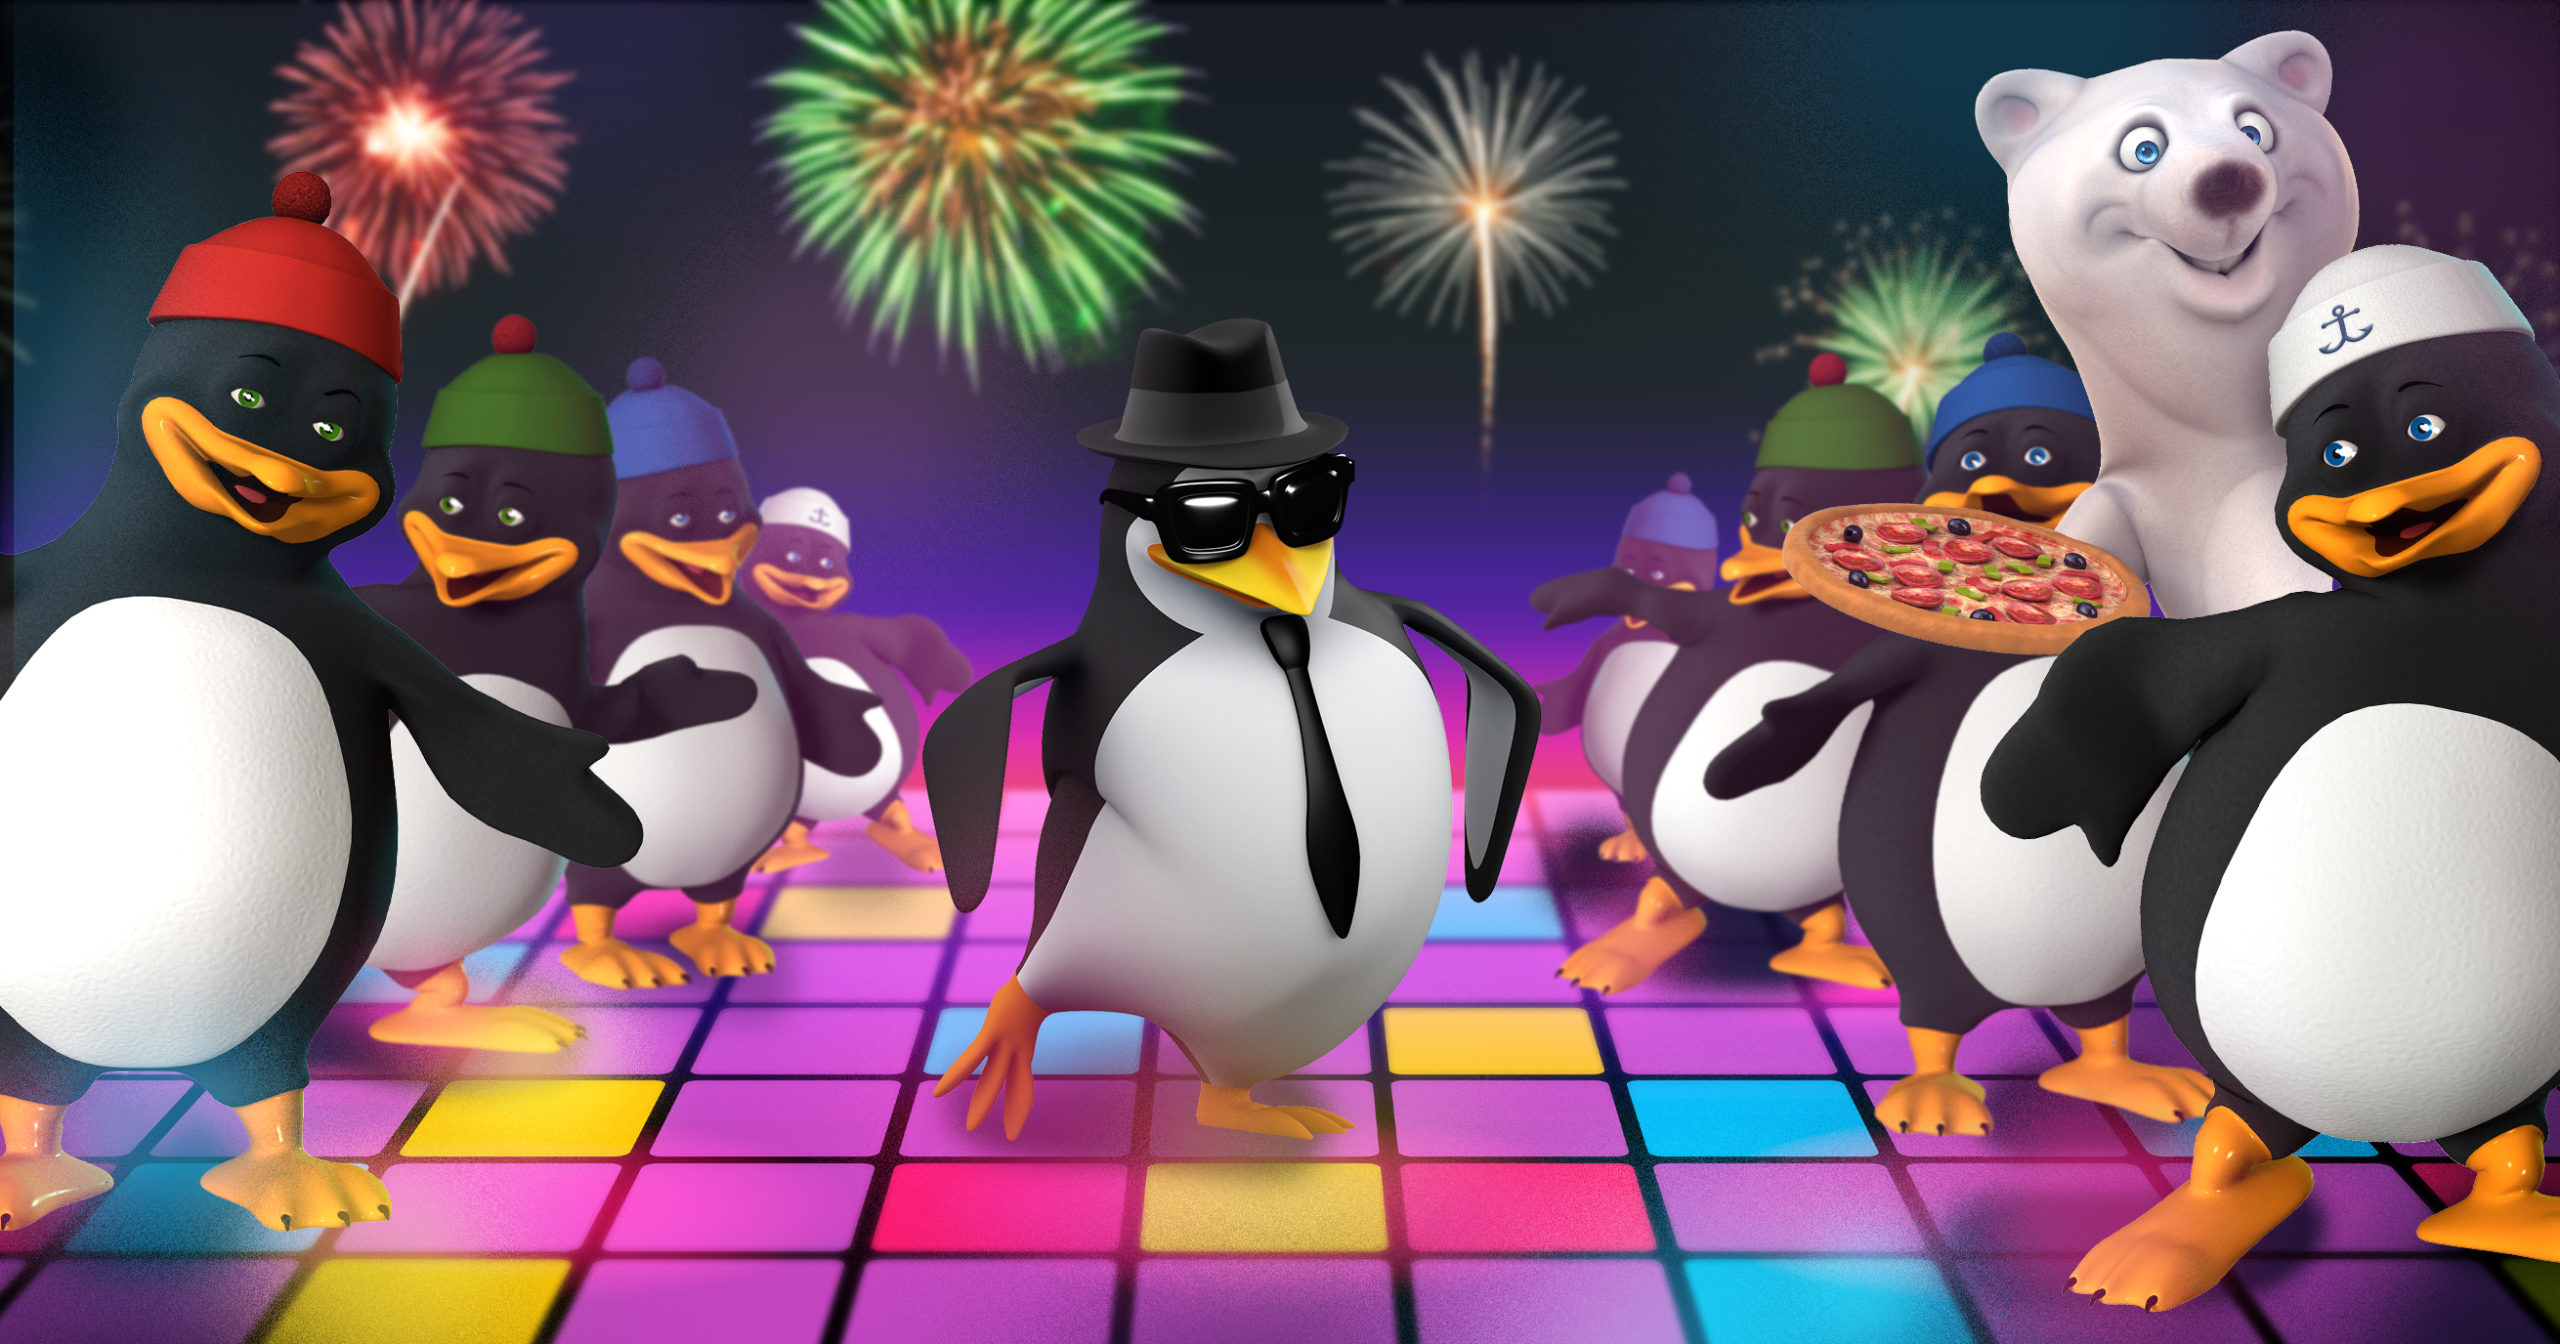 Thank God: The Penguins In This Kids Movie Just Started A Soul Train To  'Everybody Dance Now' Which Means The Movie Will Probably Be Over Soon